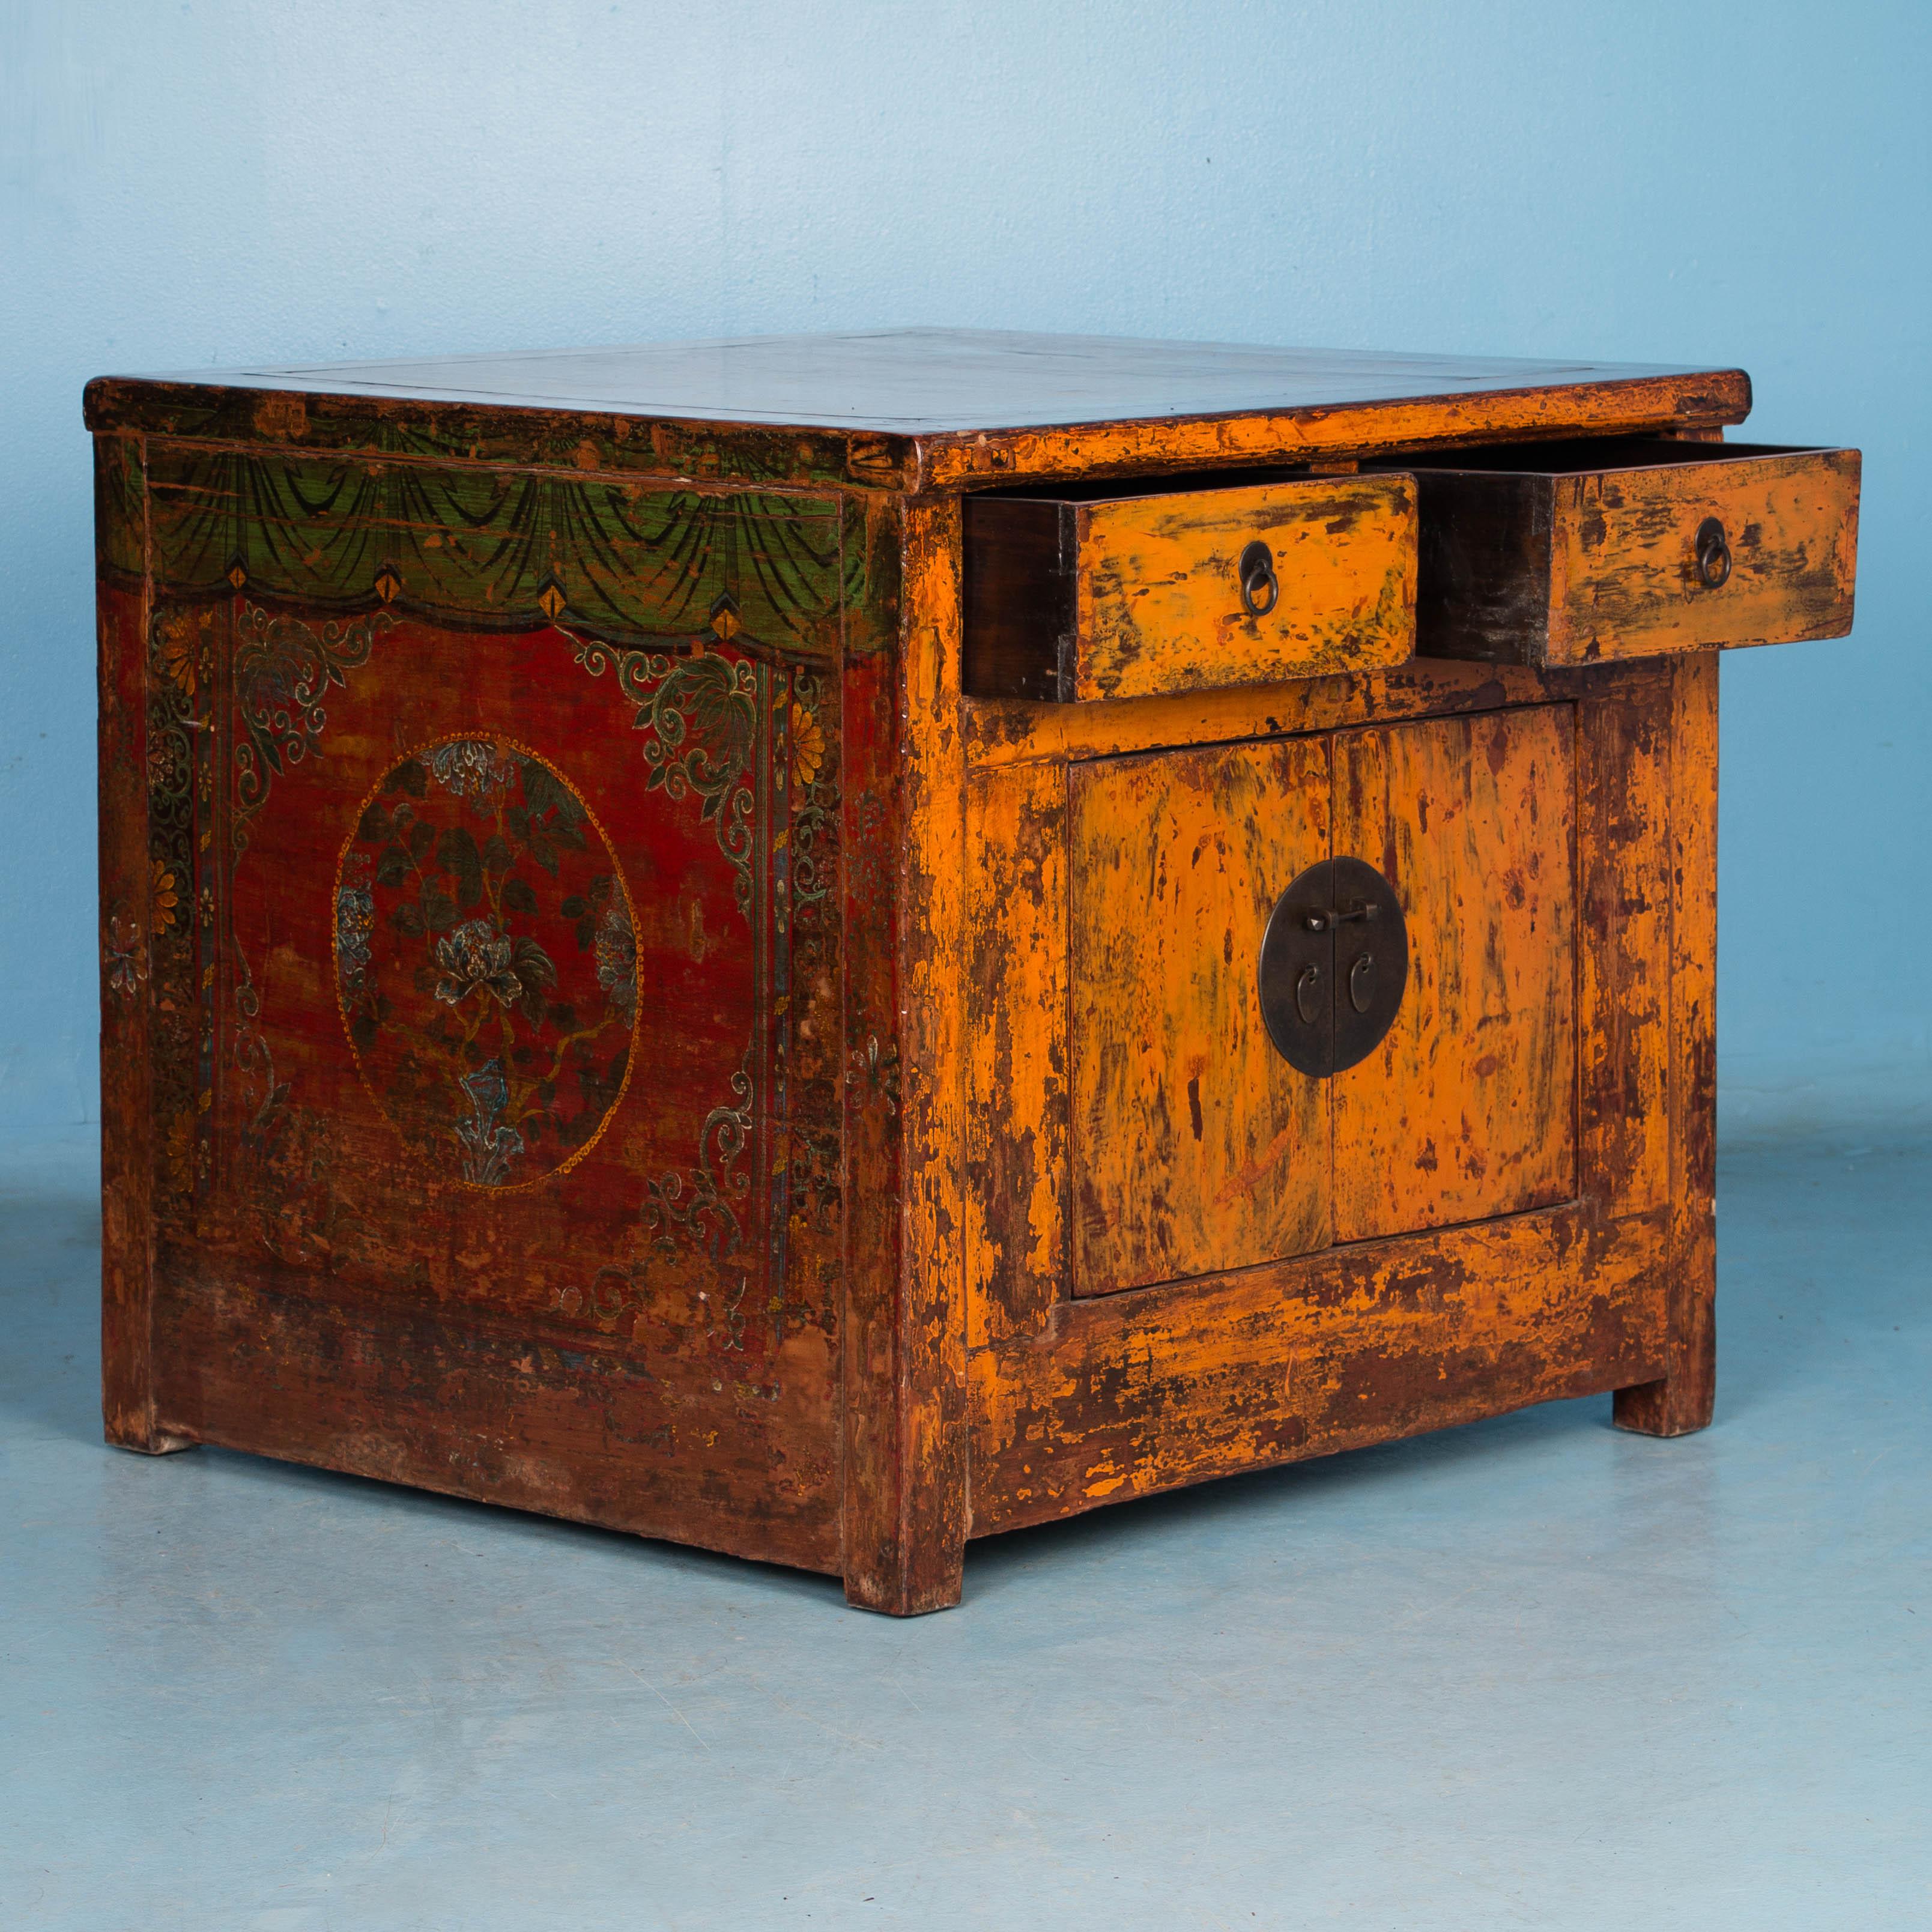 This stunning square lacquered Chinese cabinet still maintains the vibrant original paint with dominant colors of orange, red and green. Through years of use, many areas of paint have been worn down to reveal darker shades of natural wood below